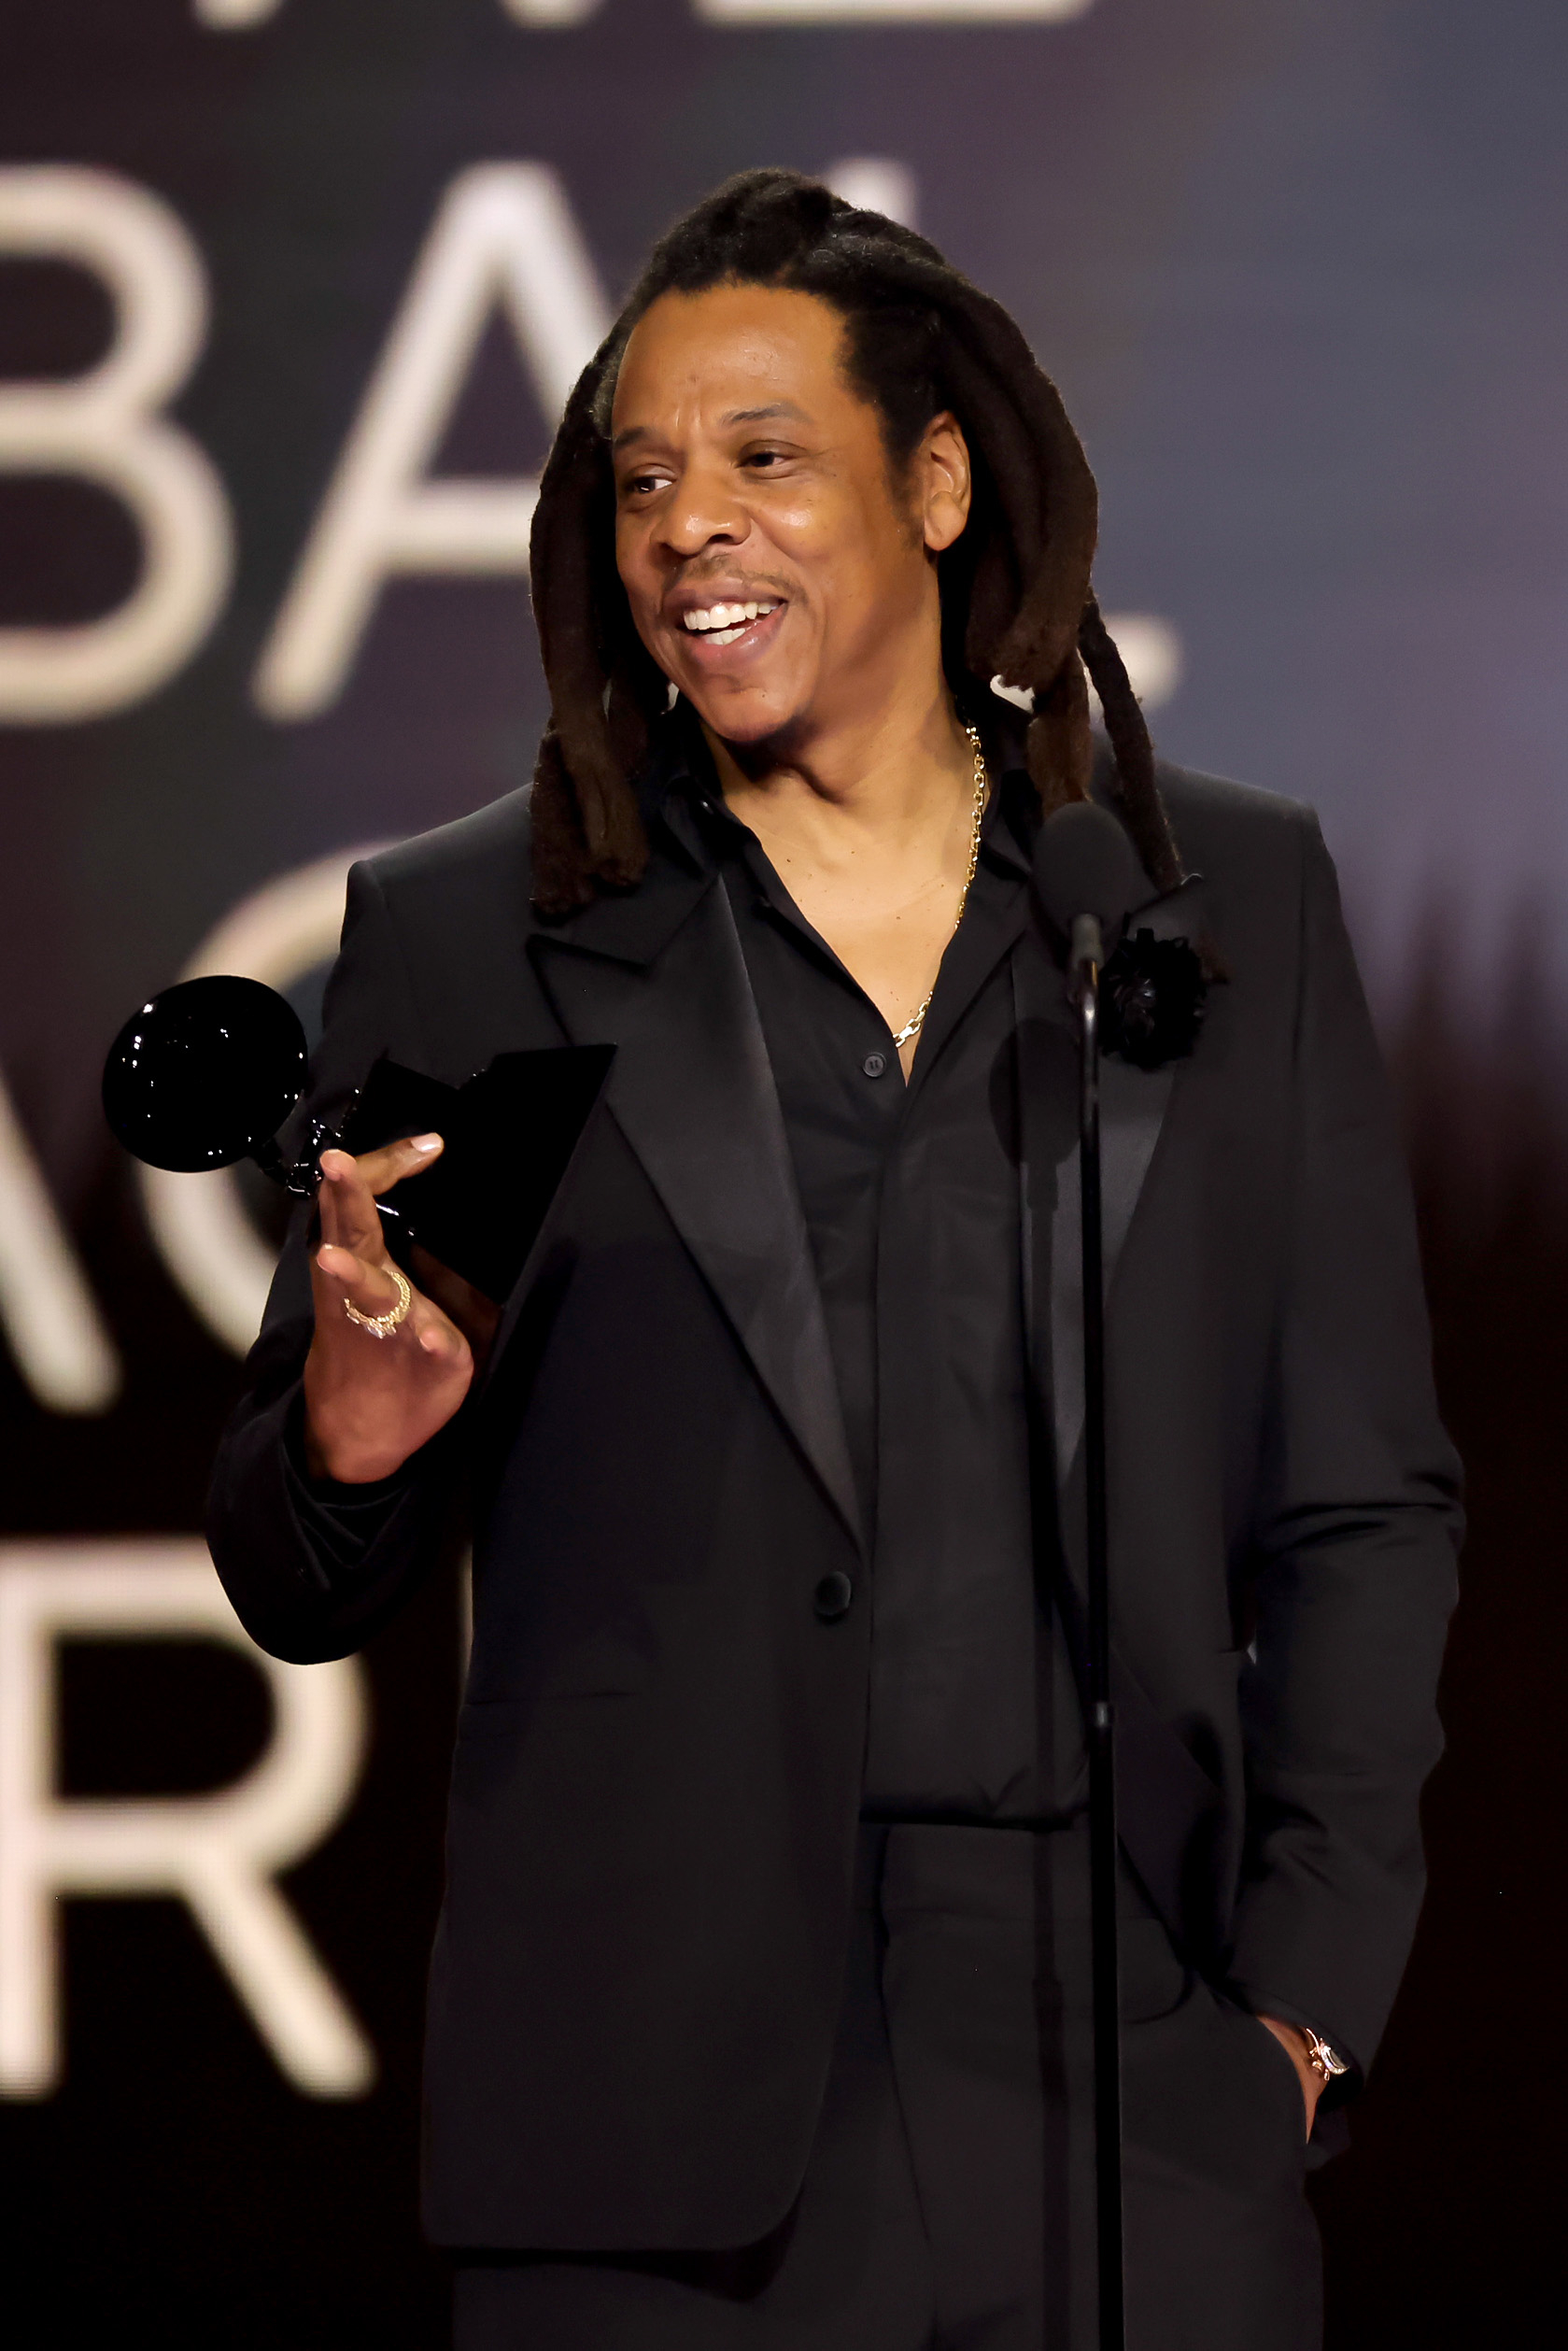 Closeup of Jay-Z smiling onstage